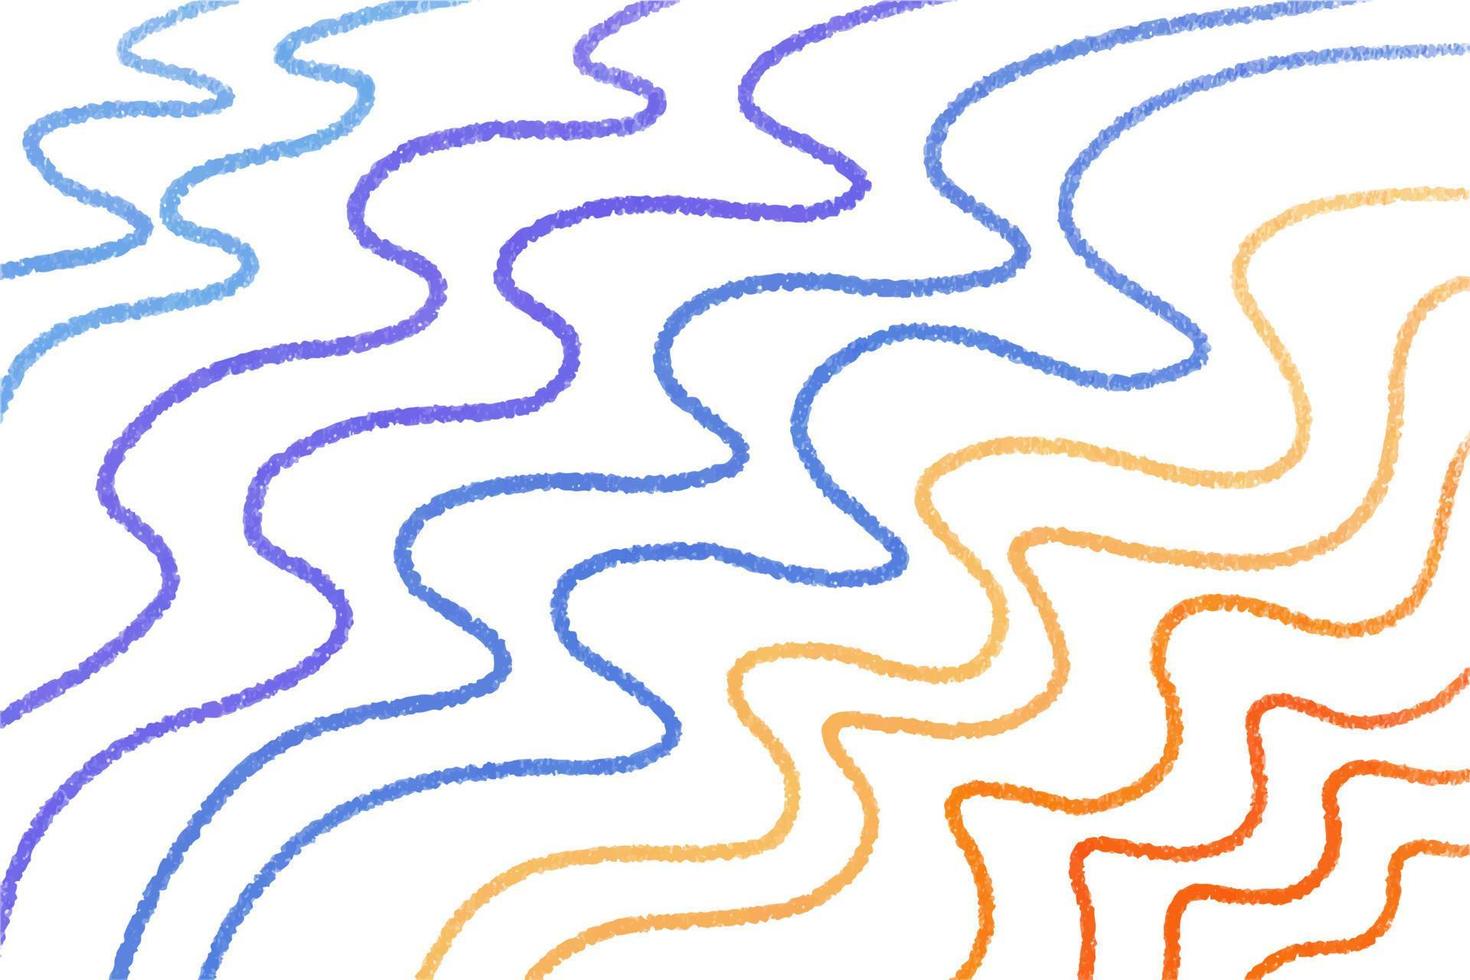 Pencil wavy background in doodle style, lines vector